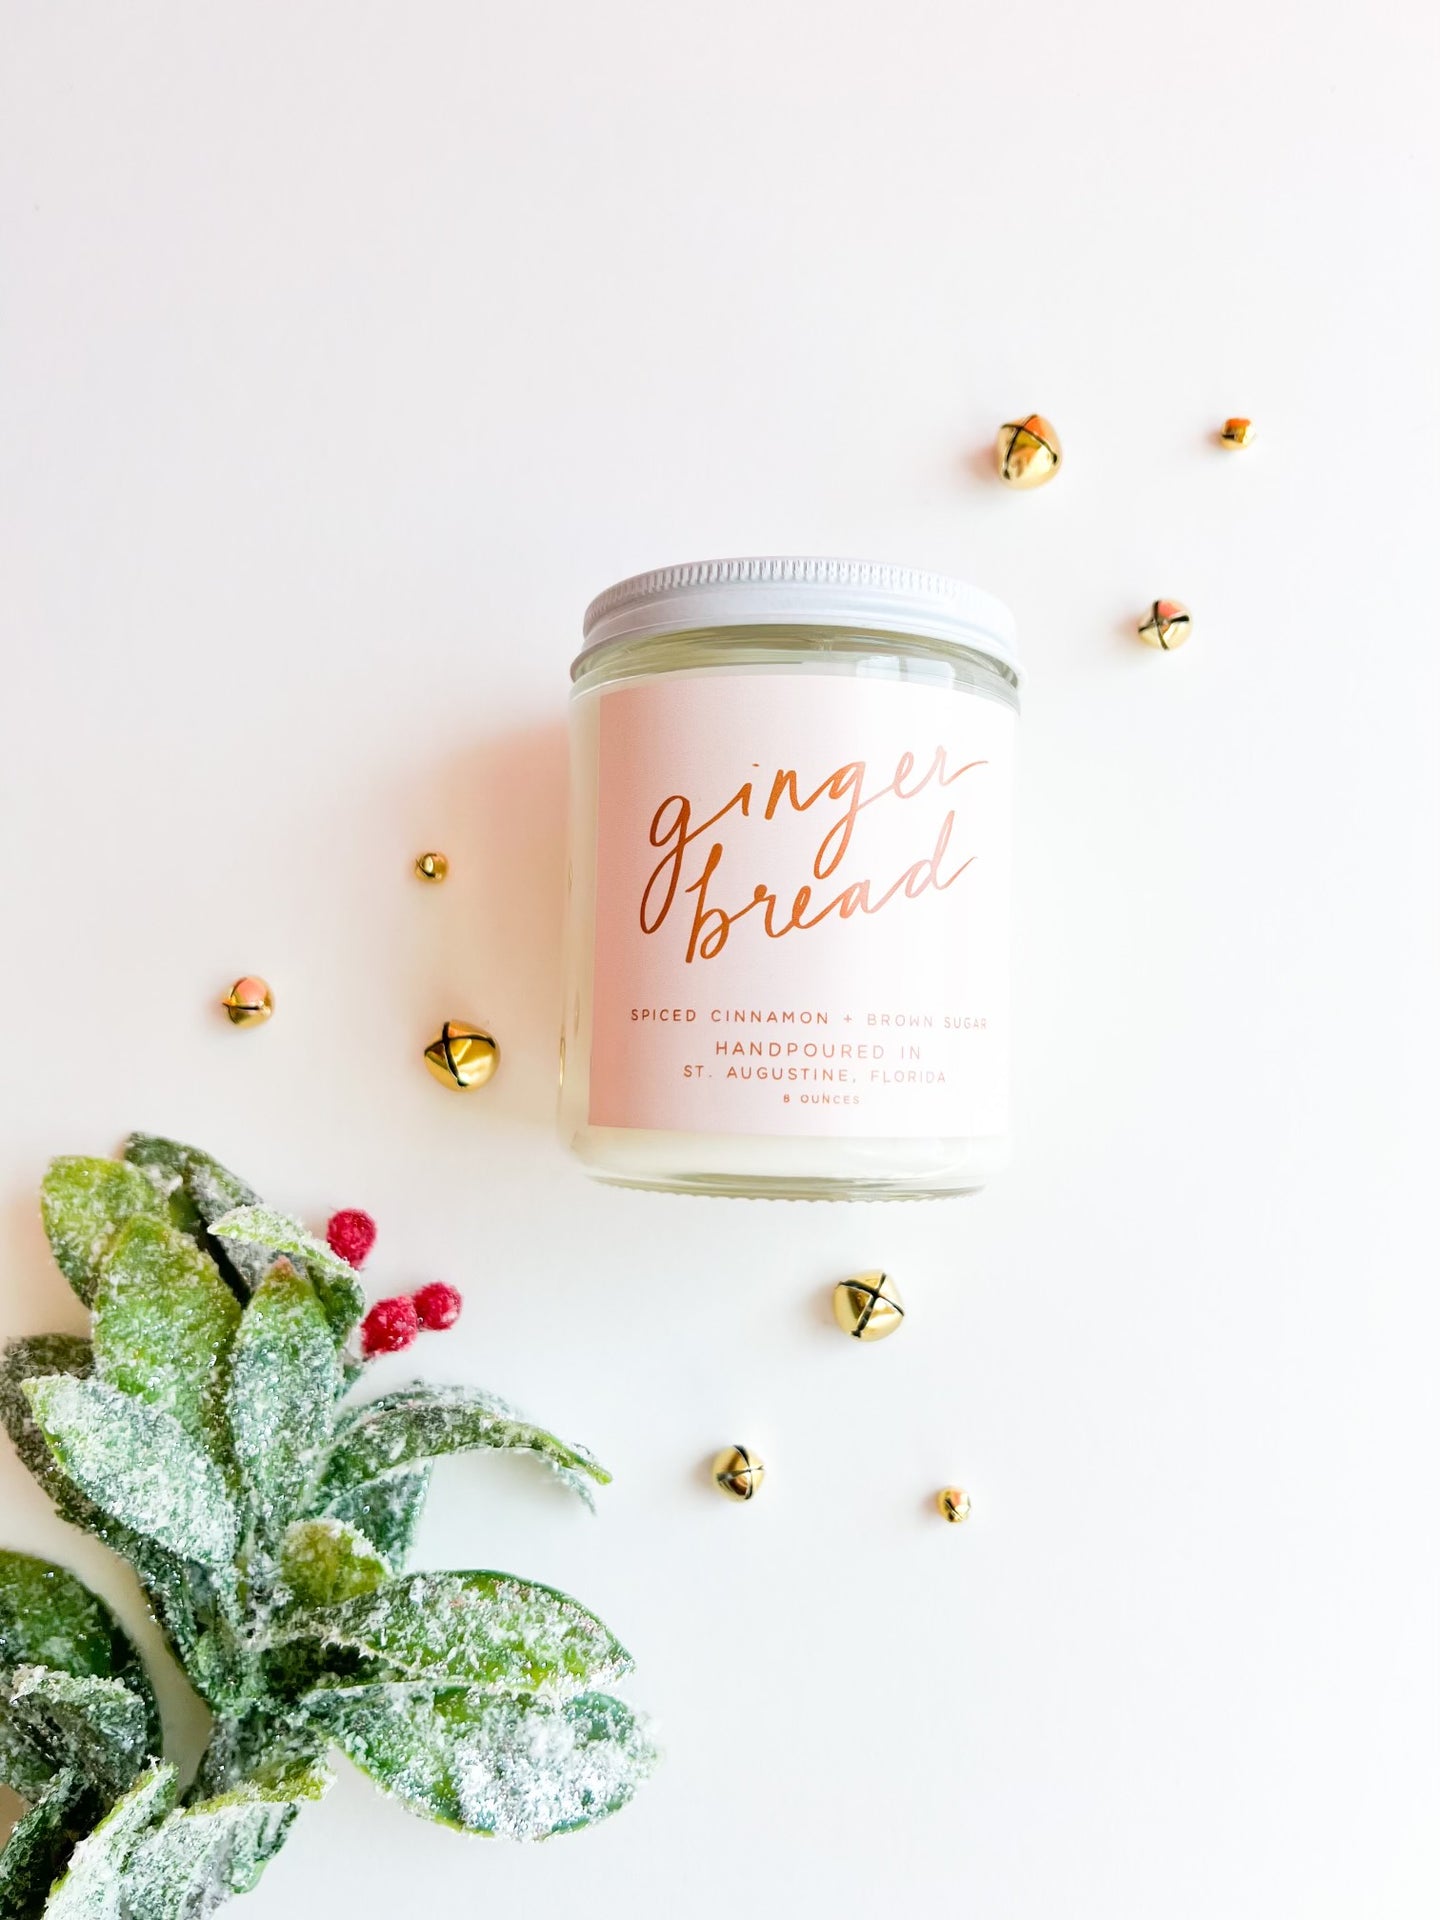 Gingerbread: 8 oz Soy Wax Hand-Poured Candle